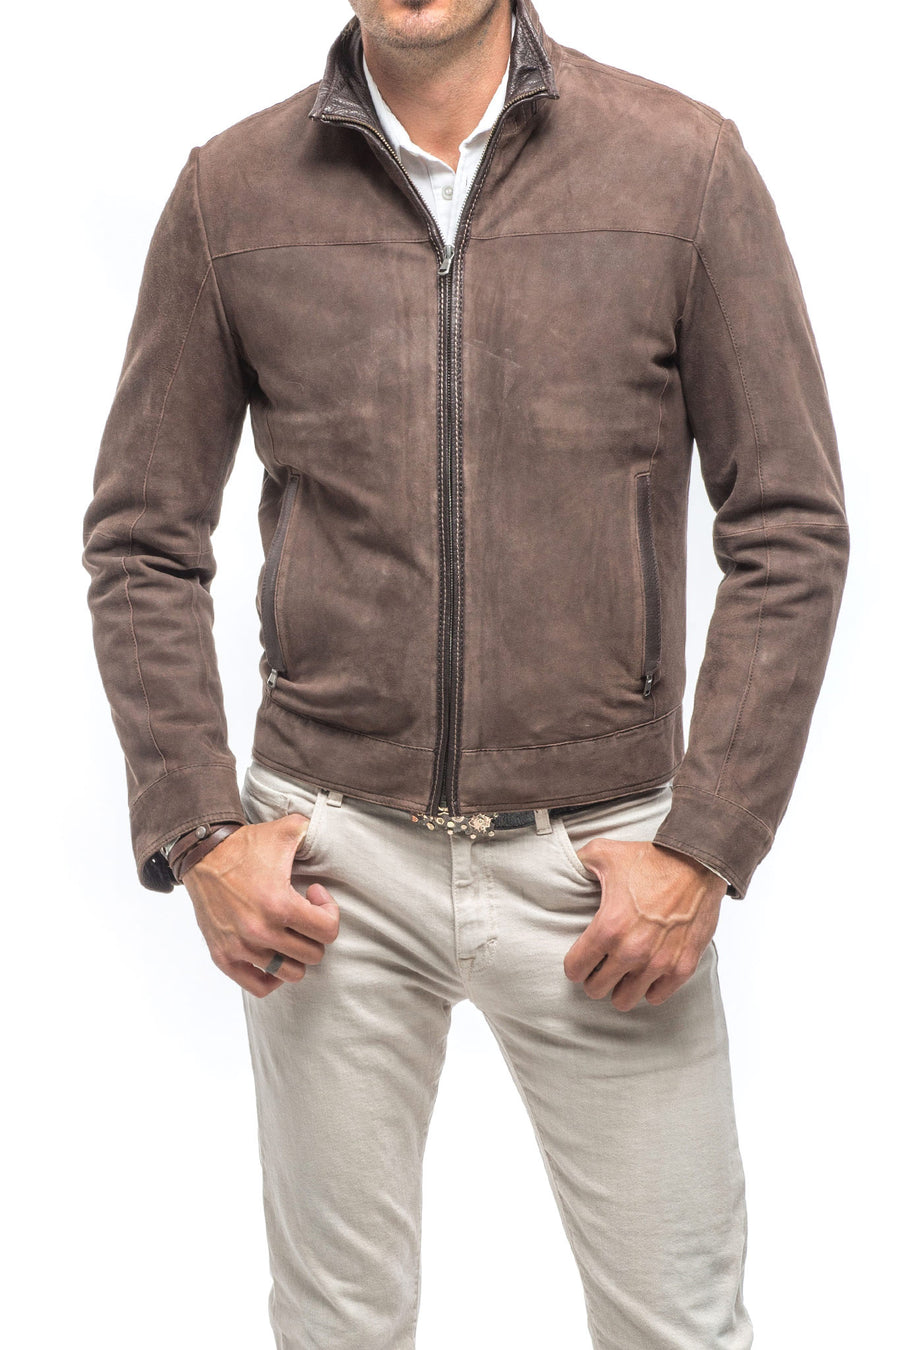 Men's Outerwear Sale | Axel's Outpost | Axel's Outpost | SALE!